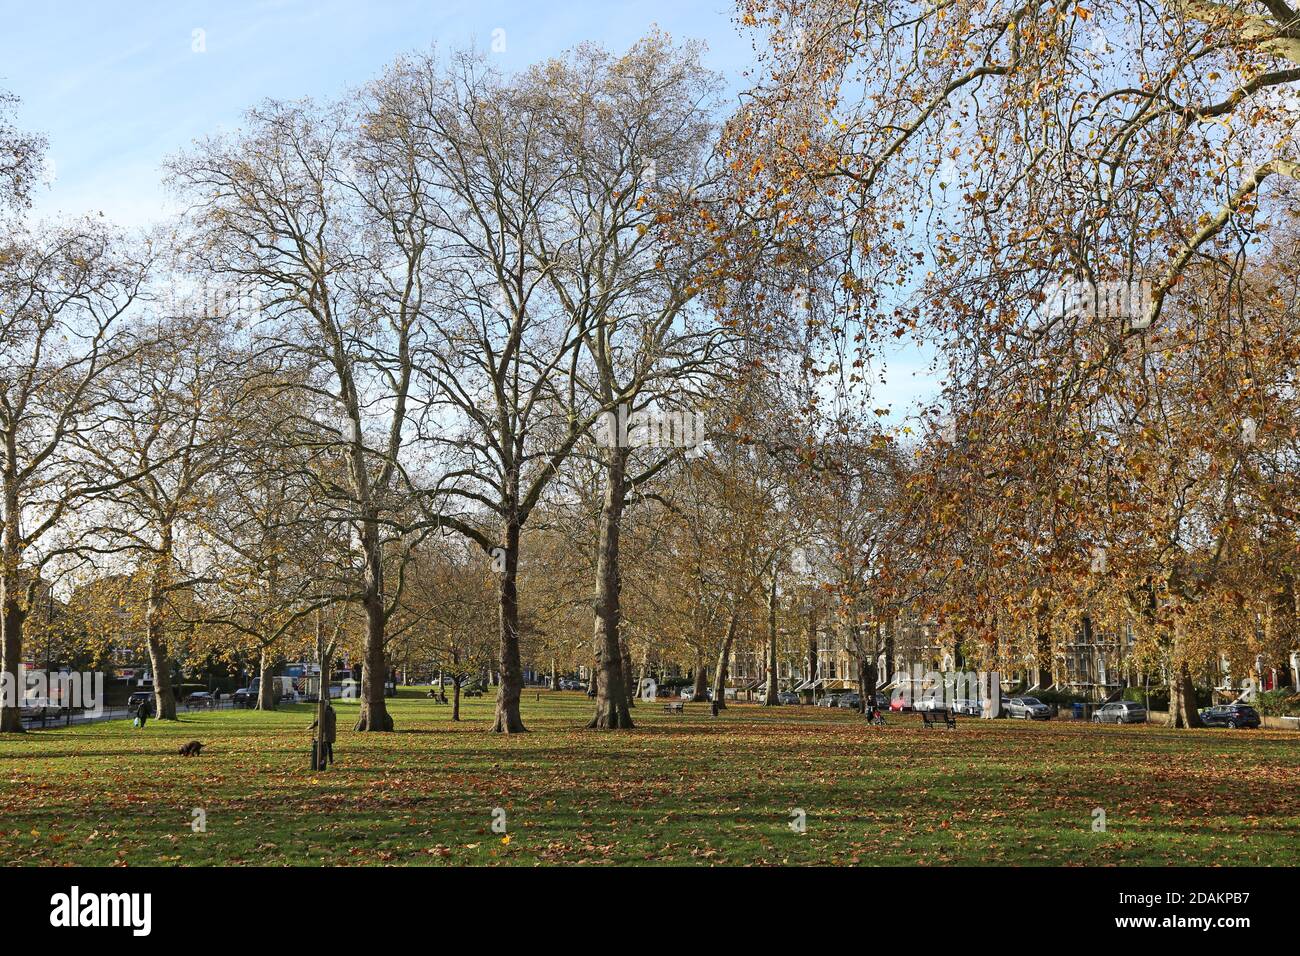 Goose Green, a tree-lined urban park in East Dulwich, London, UK. Sunny, autumn day. Stock Photo